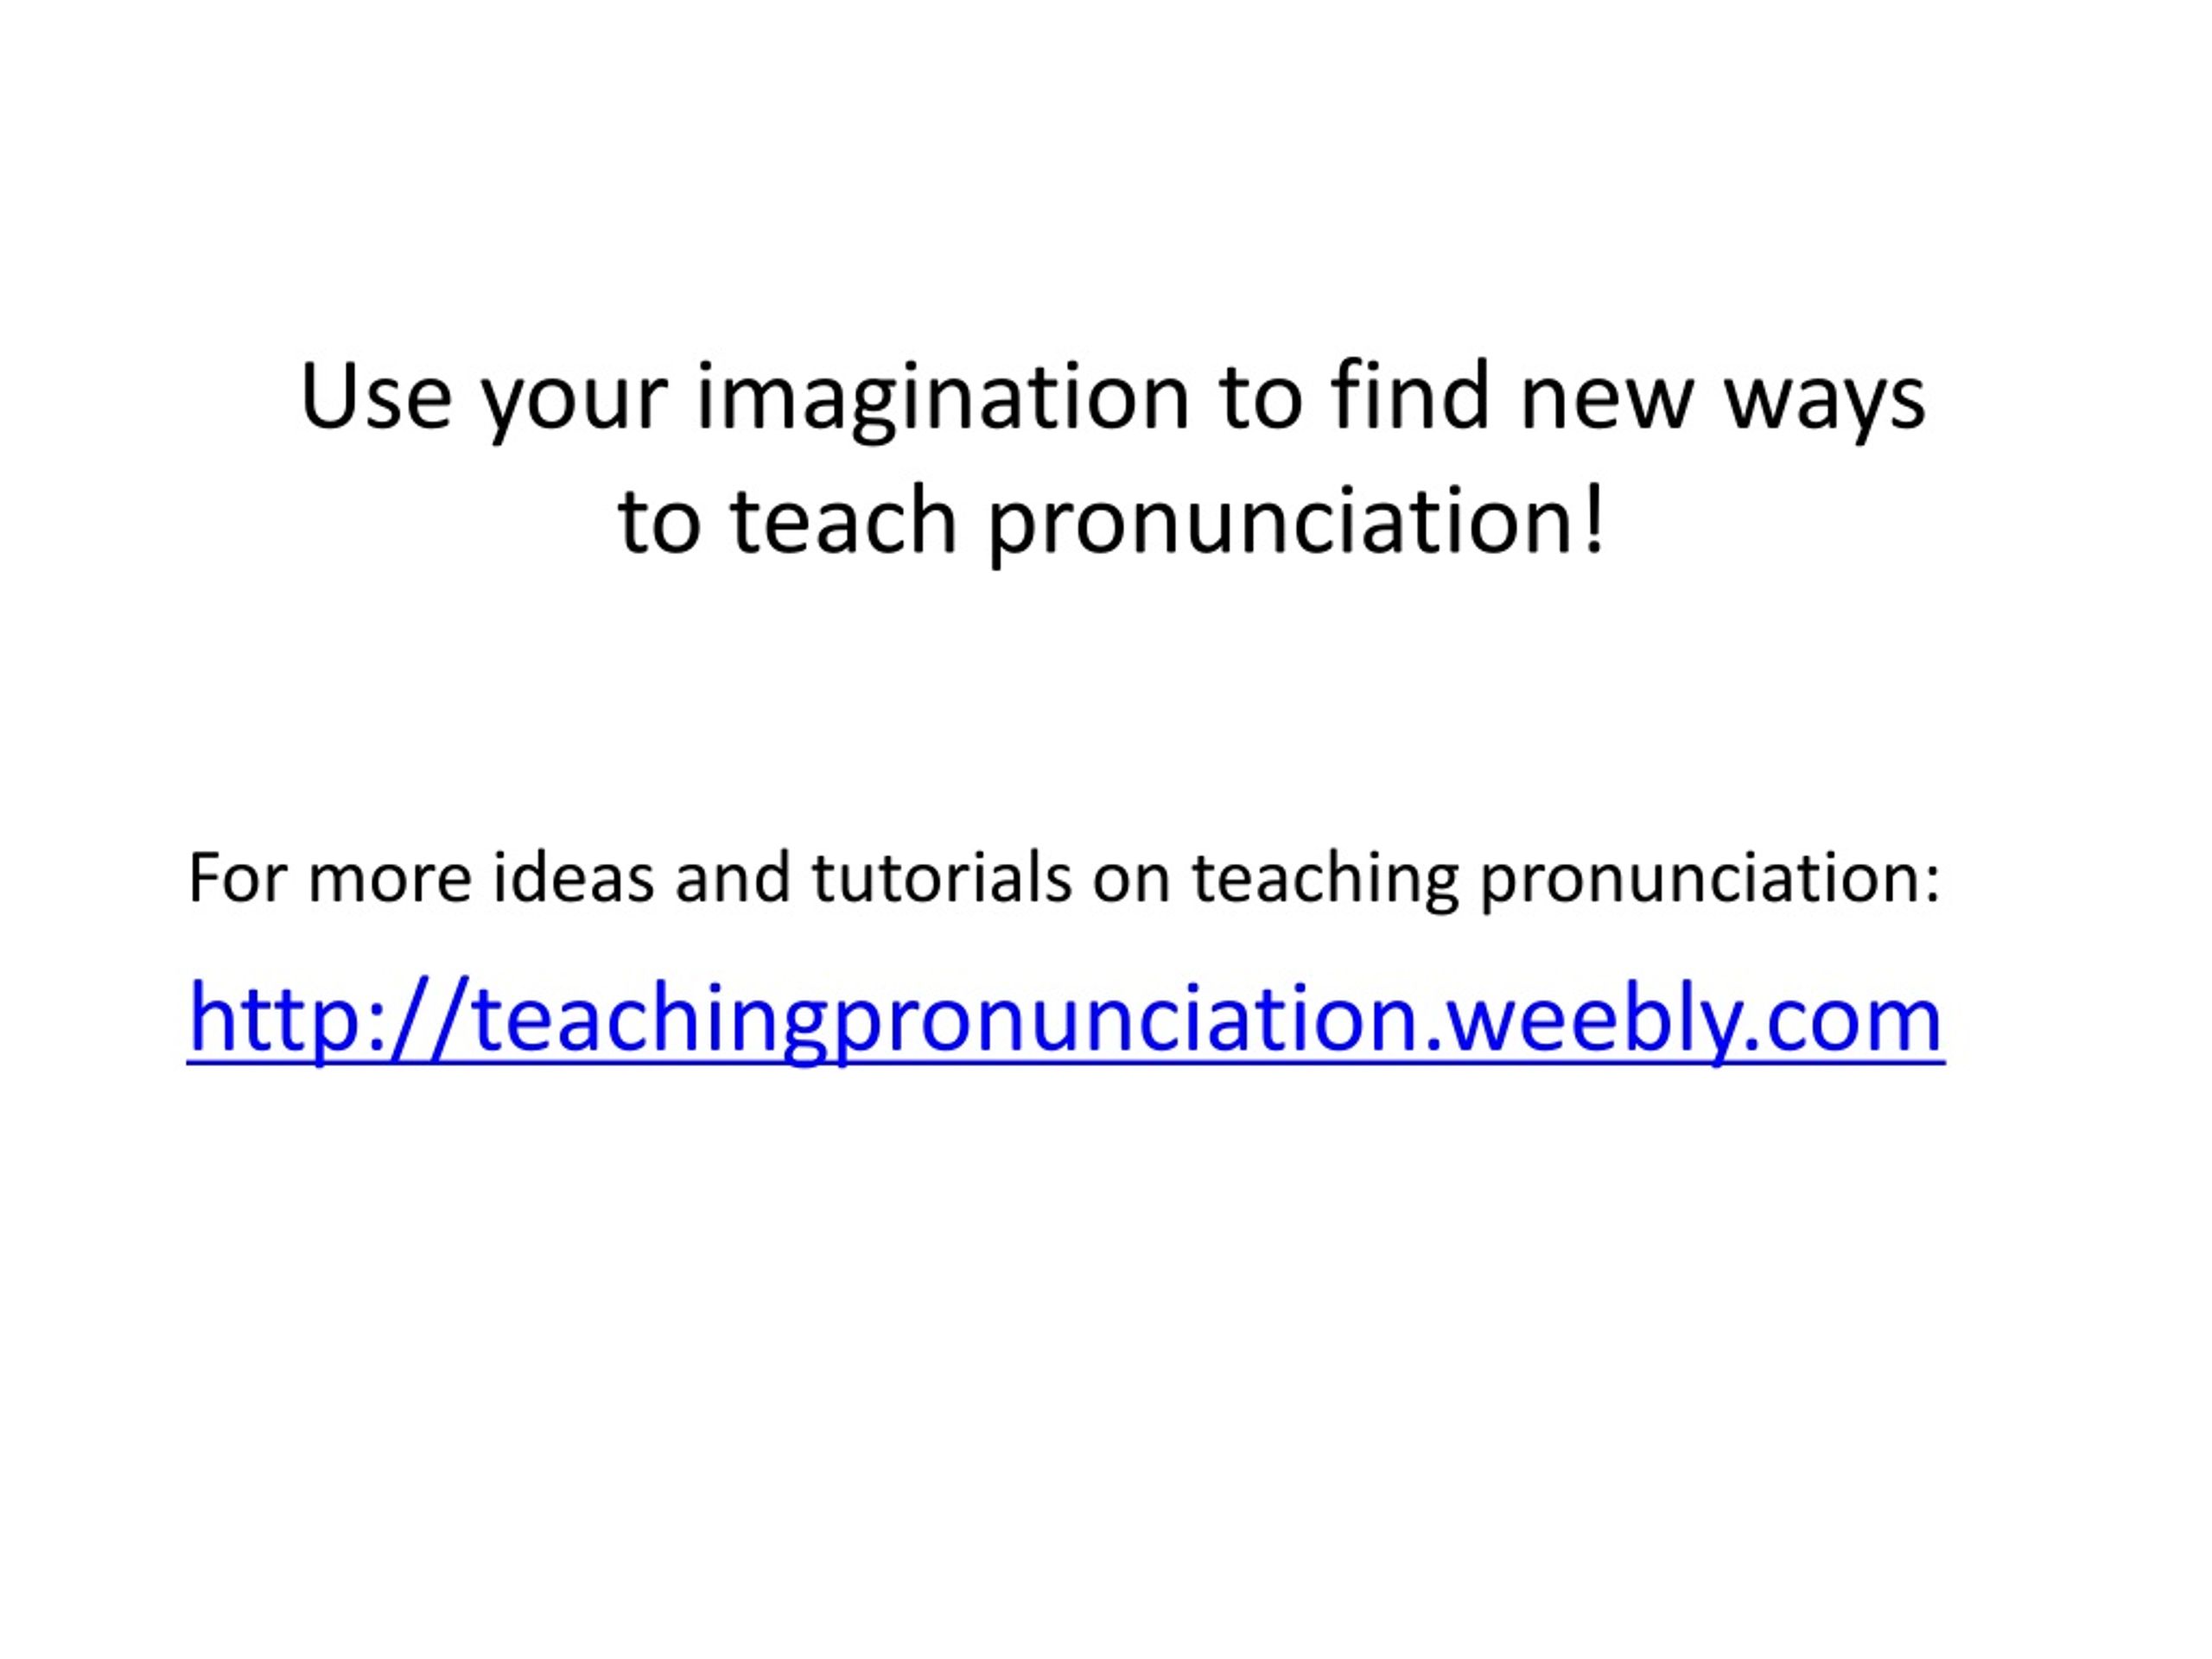 PPT - Beyond “Repeat After Me”: Teaching Pronunciation with